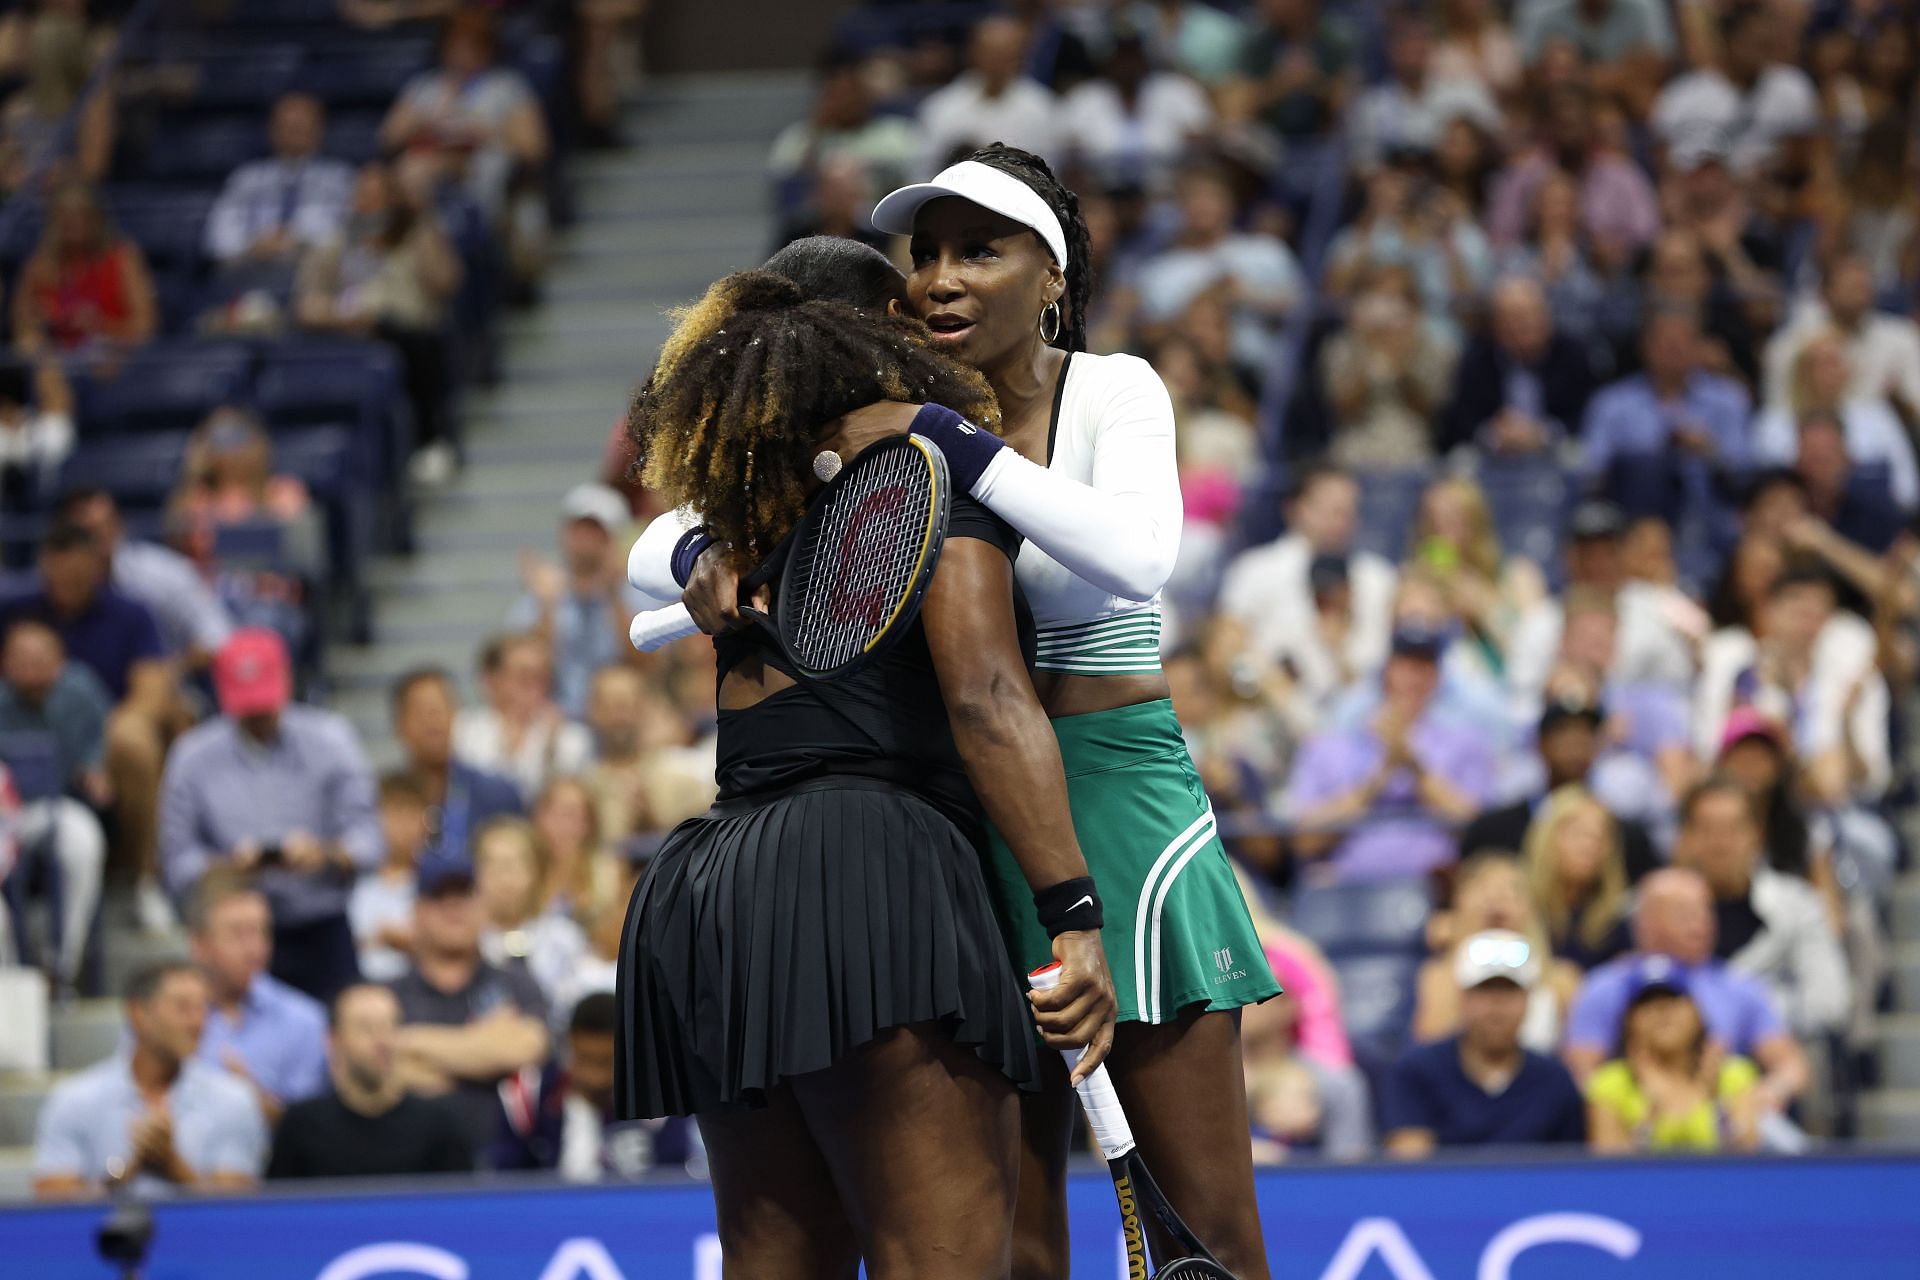 Serena Williams gets a hug from big sister Venus after the pair lost against Lucie Hradecka and Linda Noskova in the first round of doubles action in the US Open.